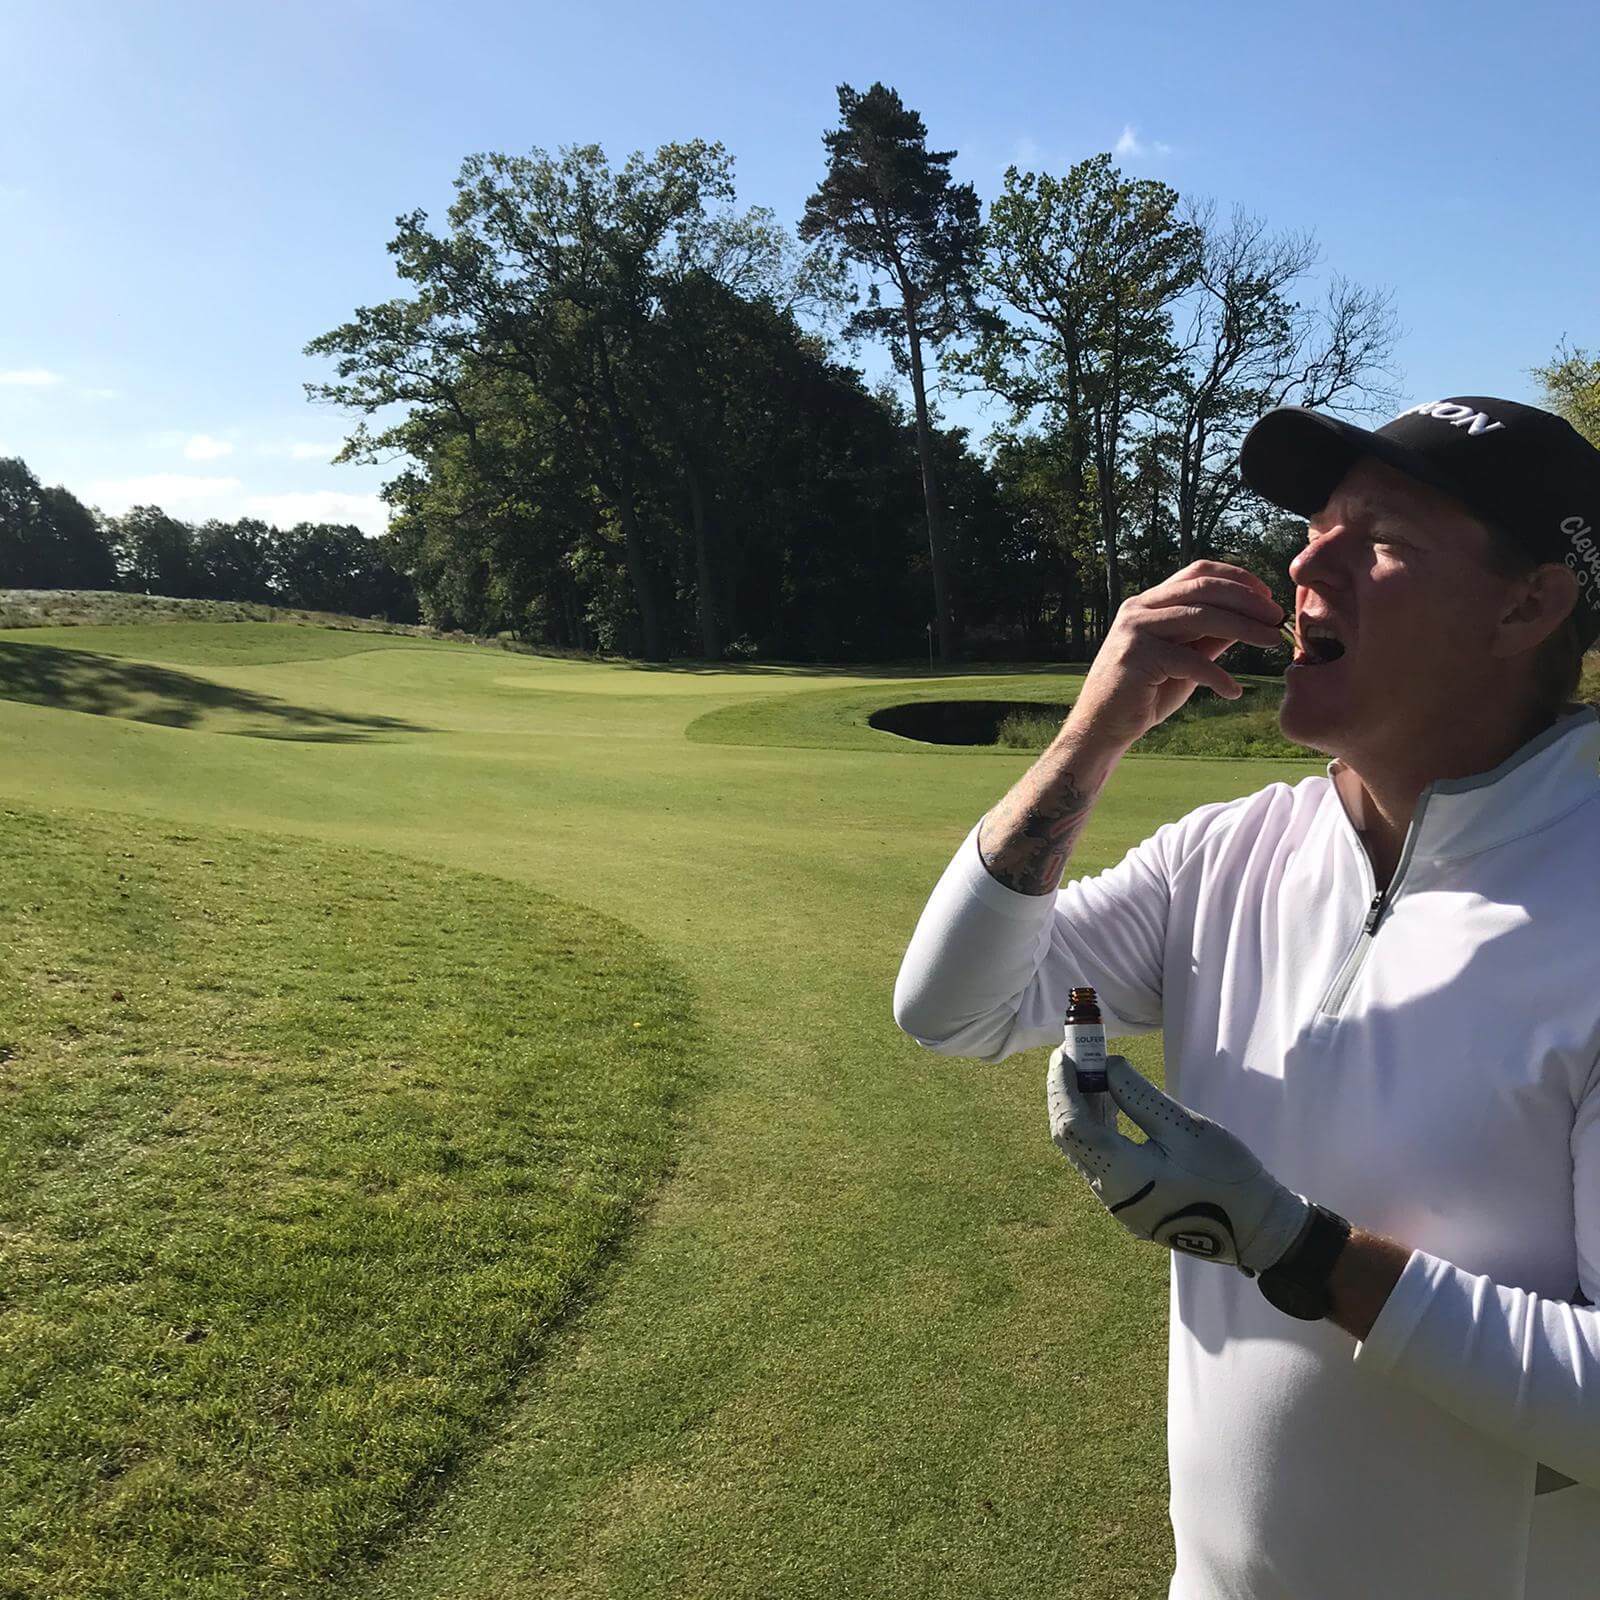 European Tour player Daniel Gaunt testing CBD products while on the course as part of his role as product development advisor